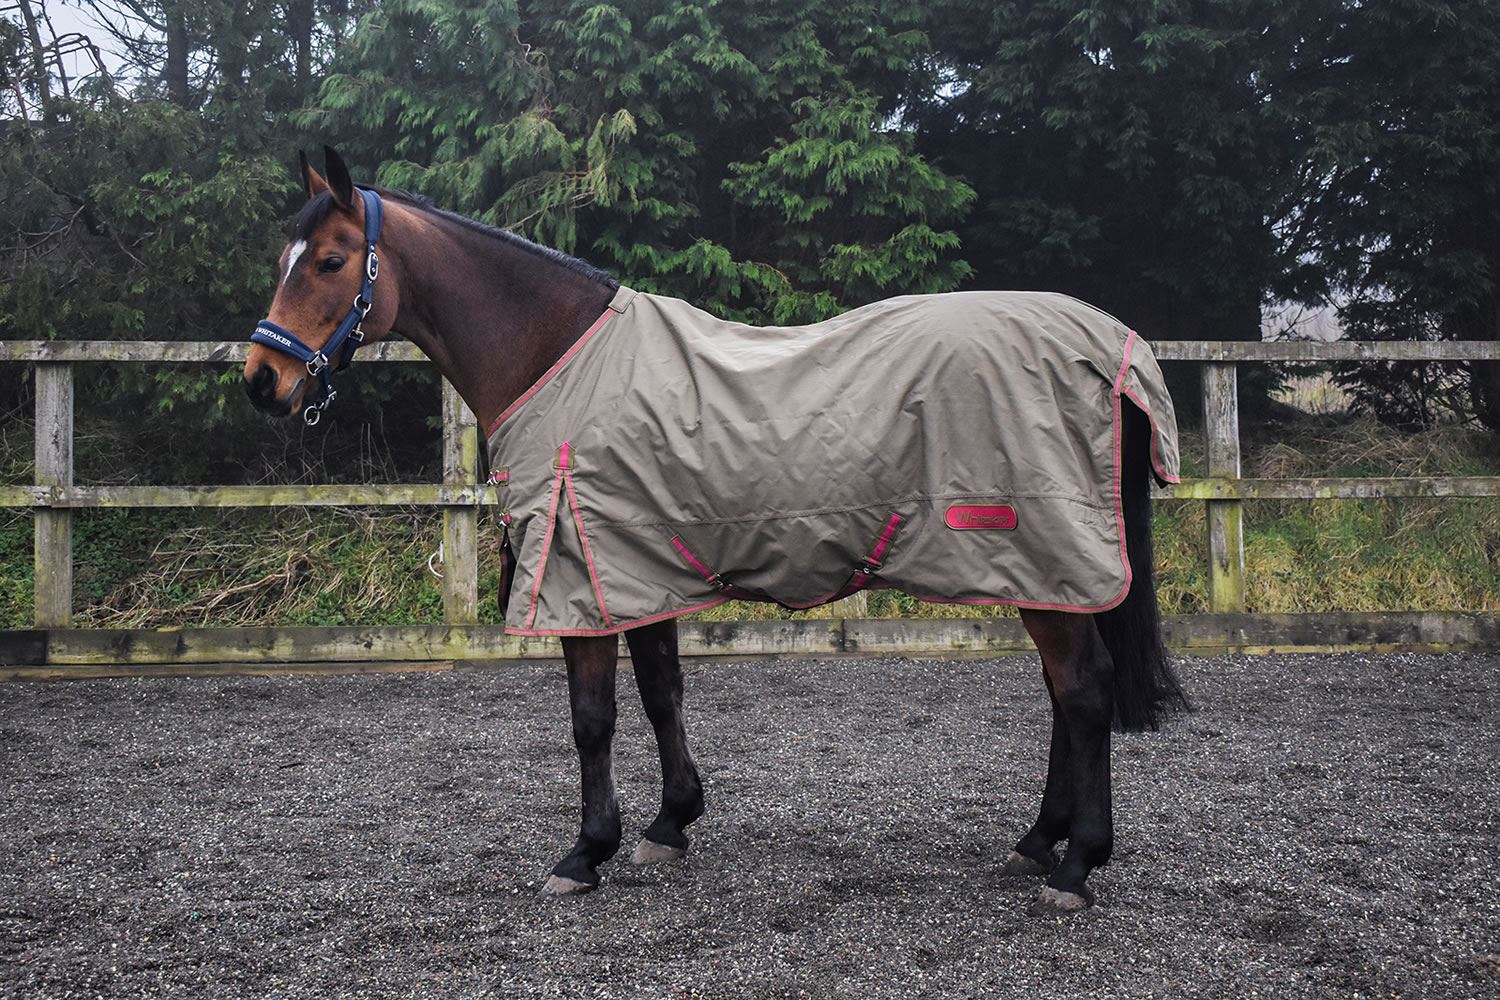 Whitaker Turnout Rug Tanfield 50 Gm - Just Horse Riders